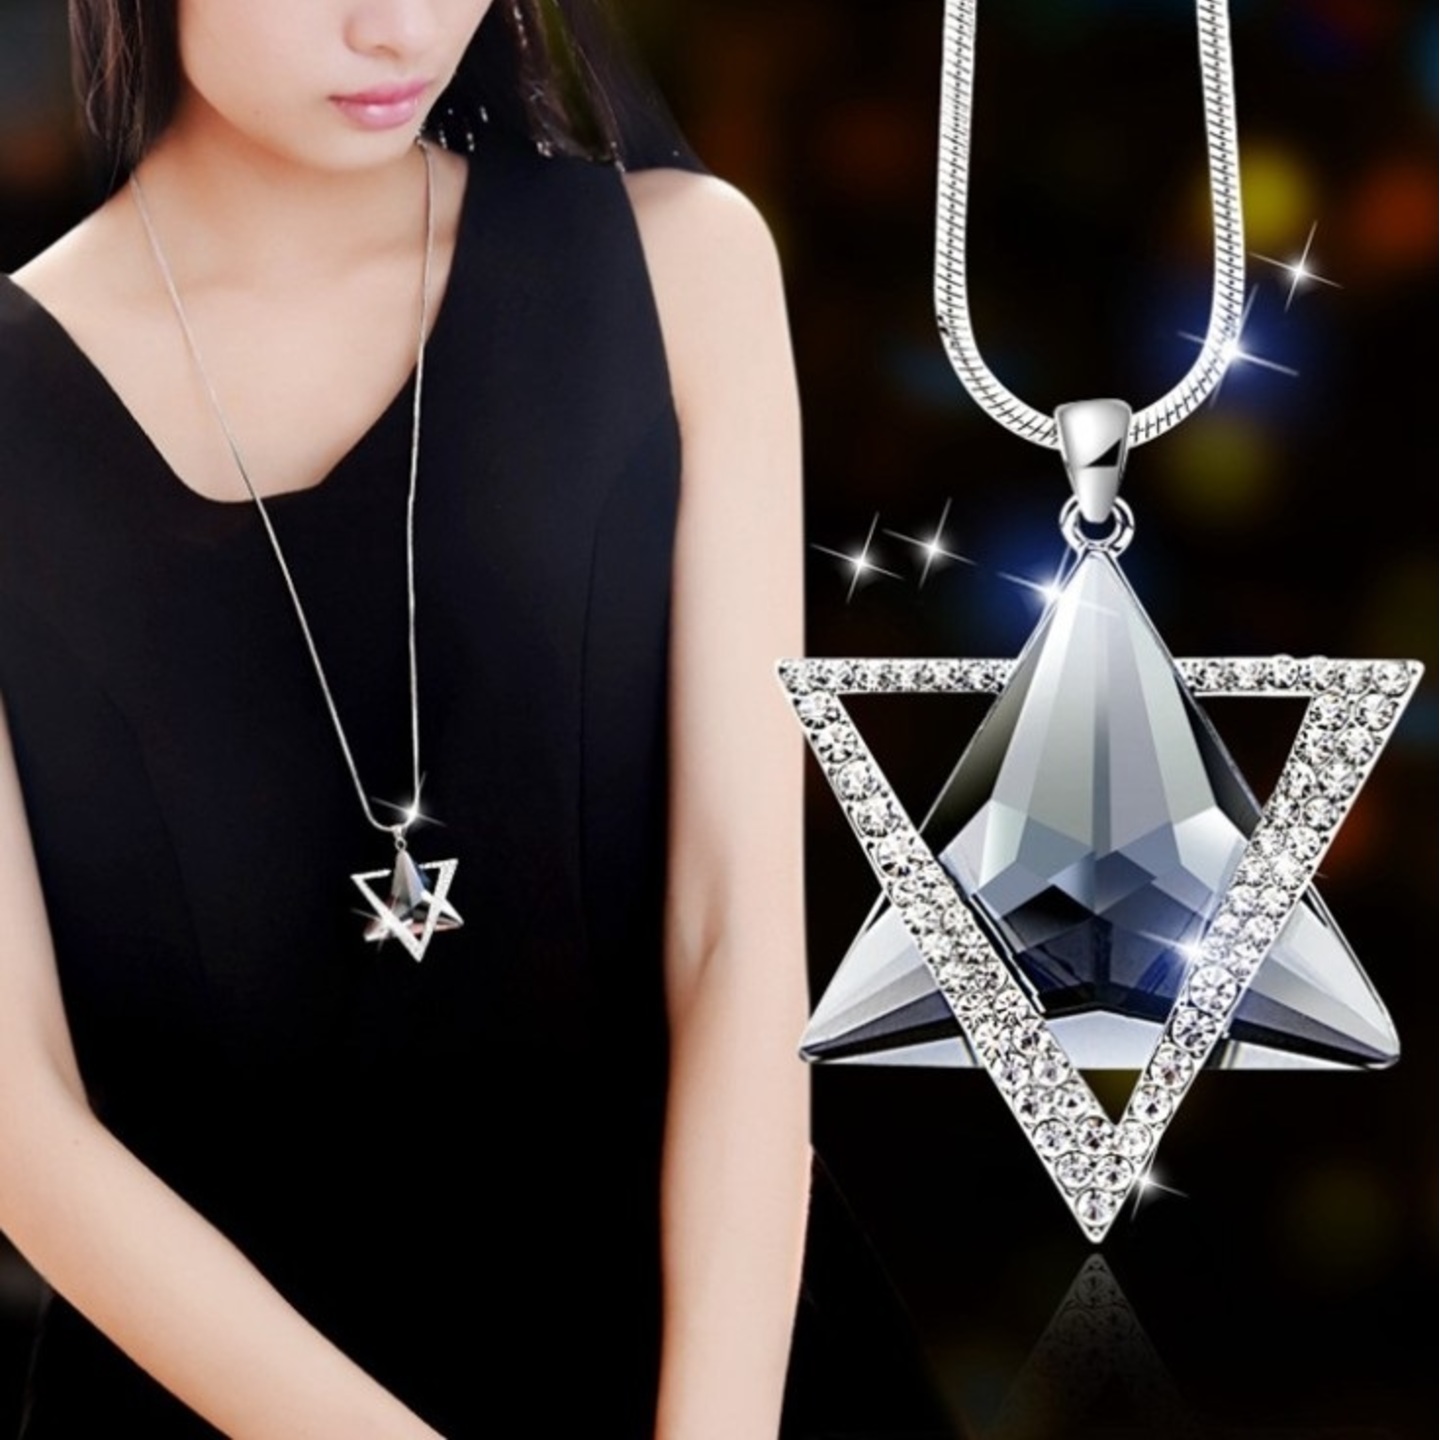 Six Star Crystal Necklace